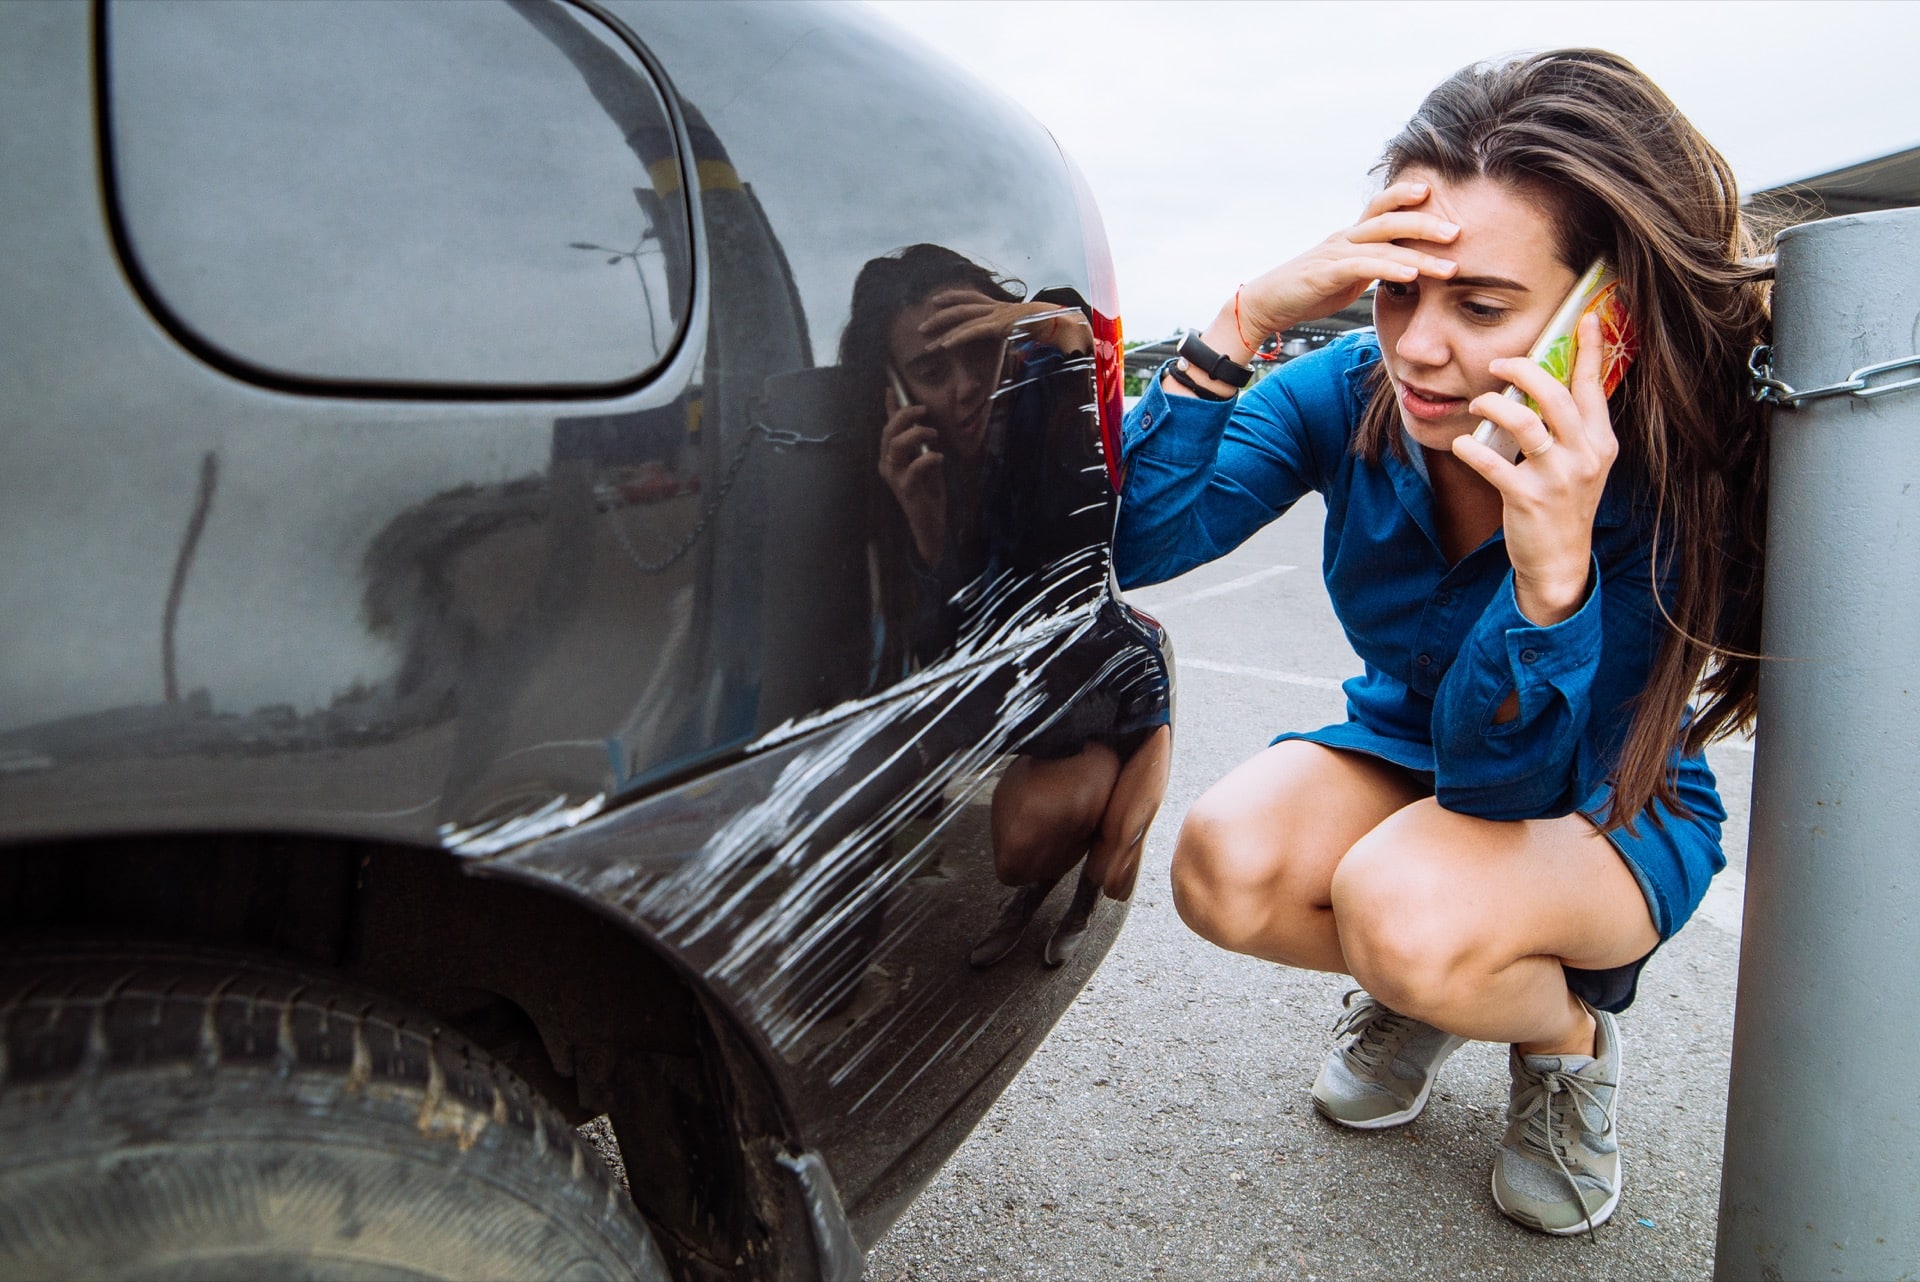 Women looking at her damaged car